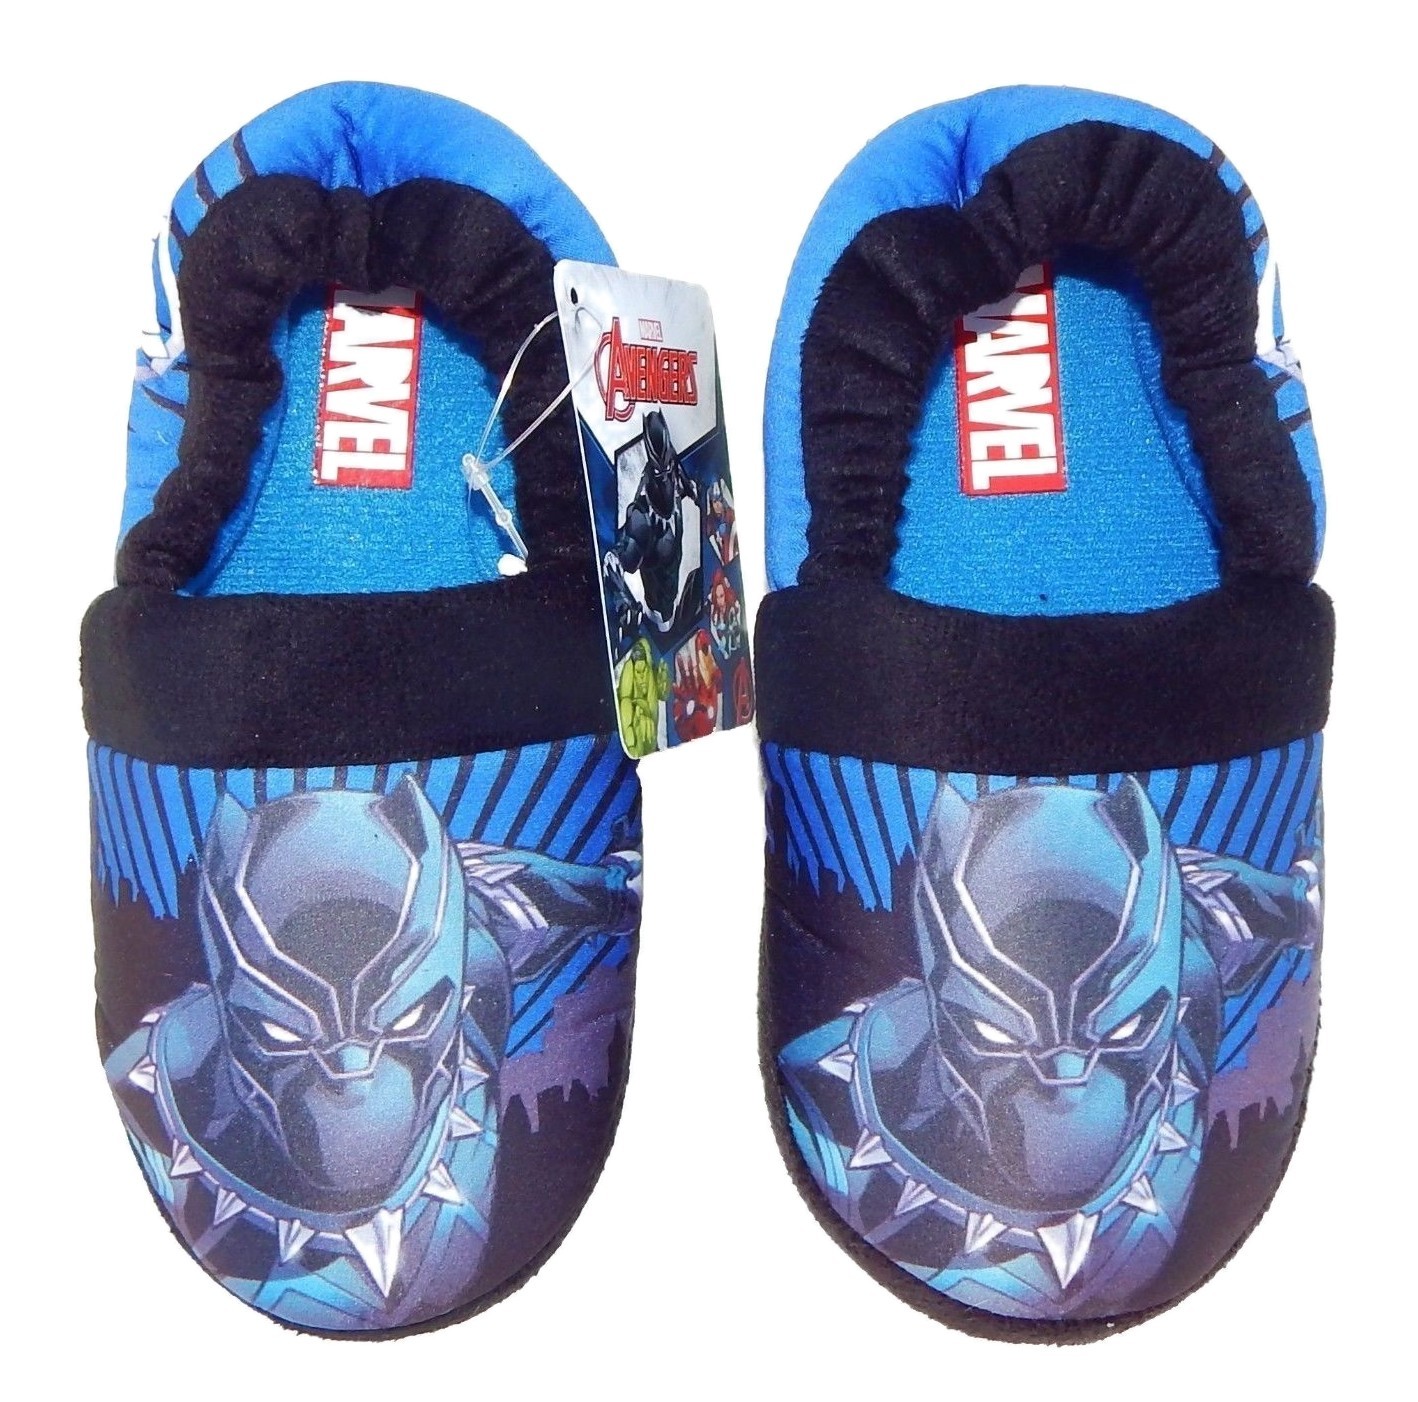 BLACK PANTHER MARVEL AVENGERS Boys Plush House Slippers NWT Toddler's Size 9/10 - $12.86 - $12.99